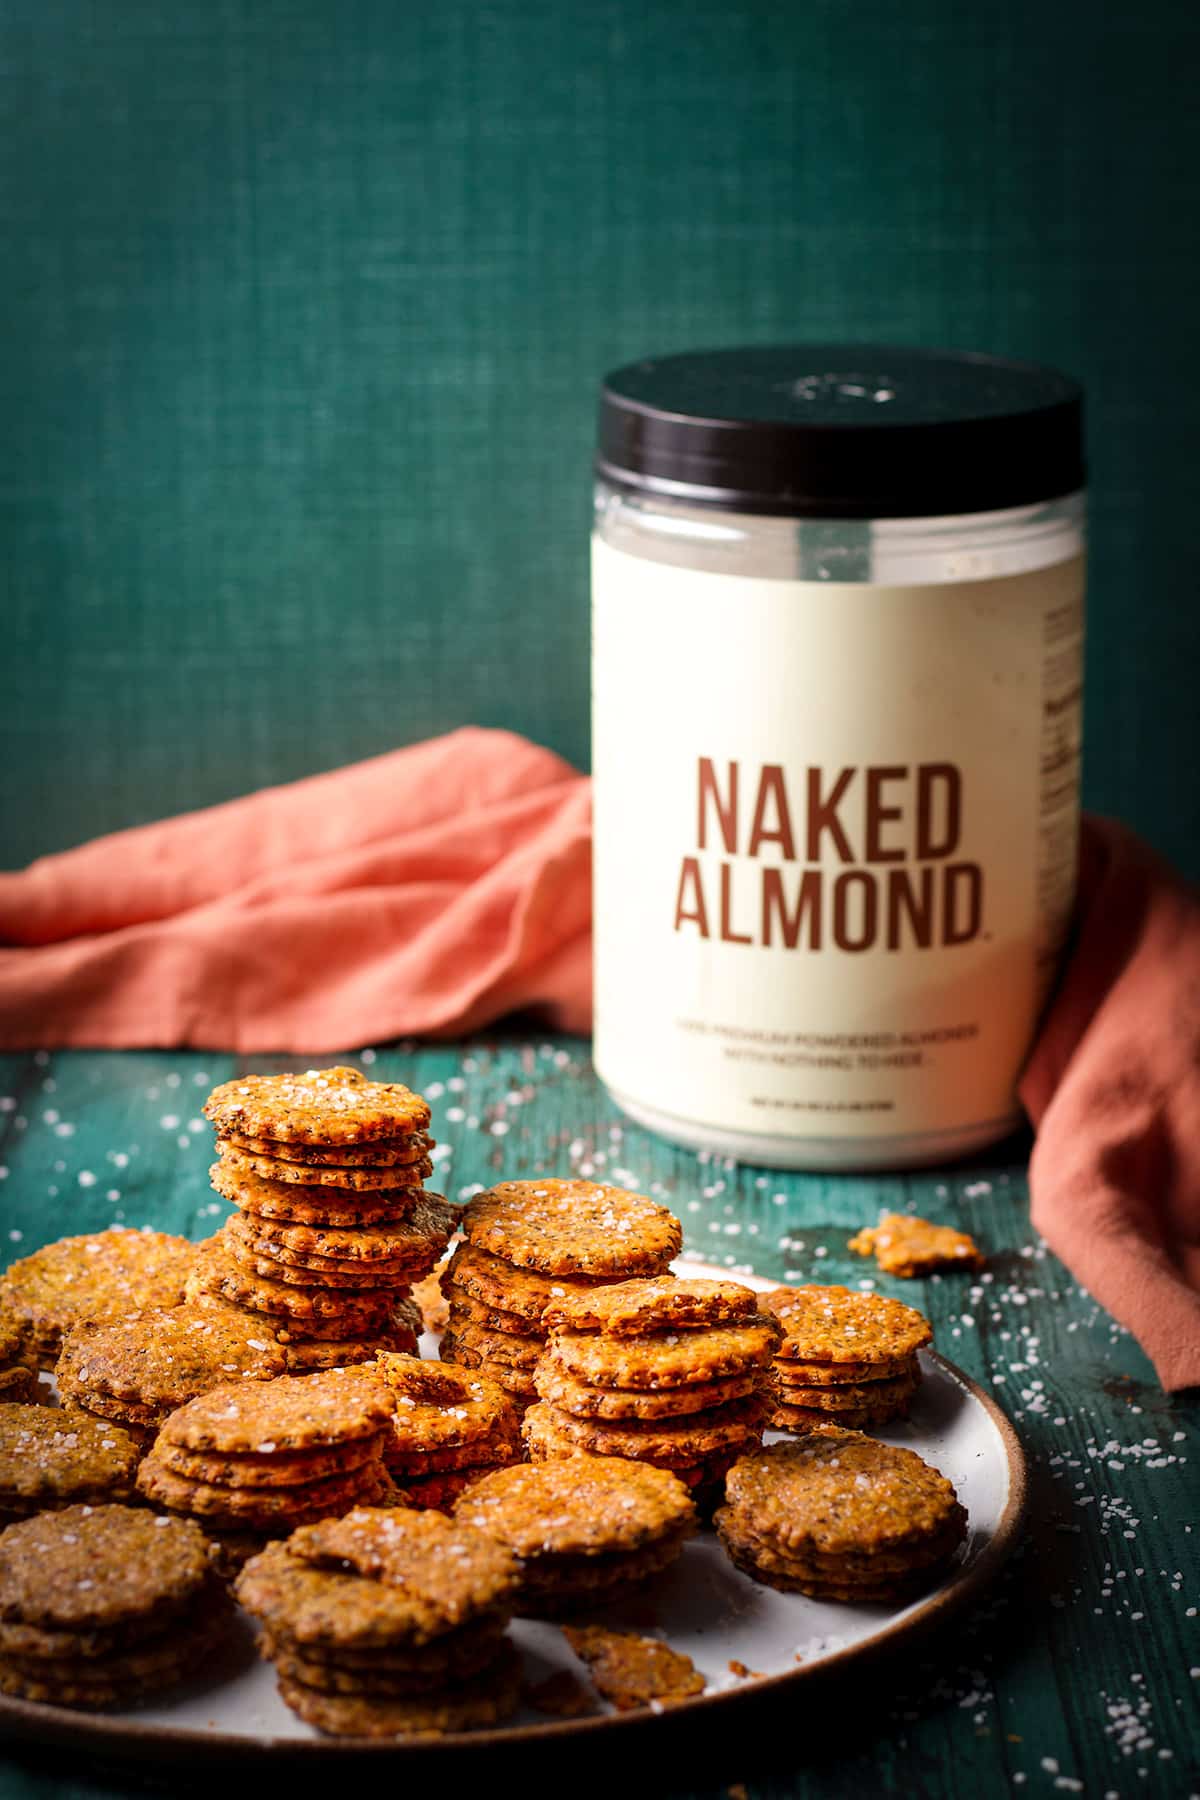 Stacks of gluten free almond cheese crackers on a table next to a container of Naked Almond powder.